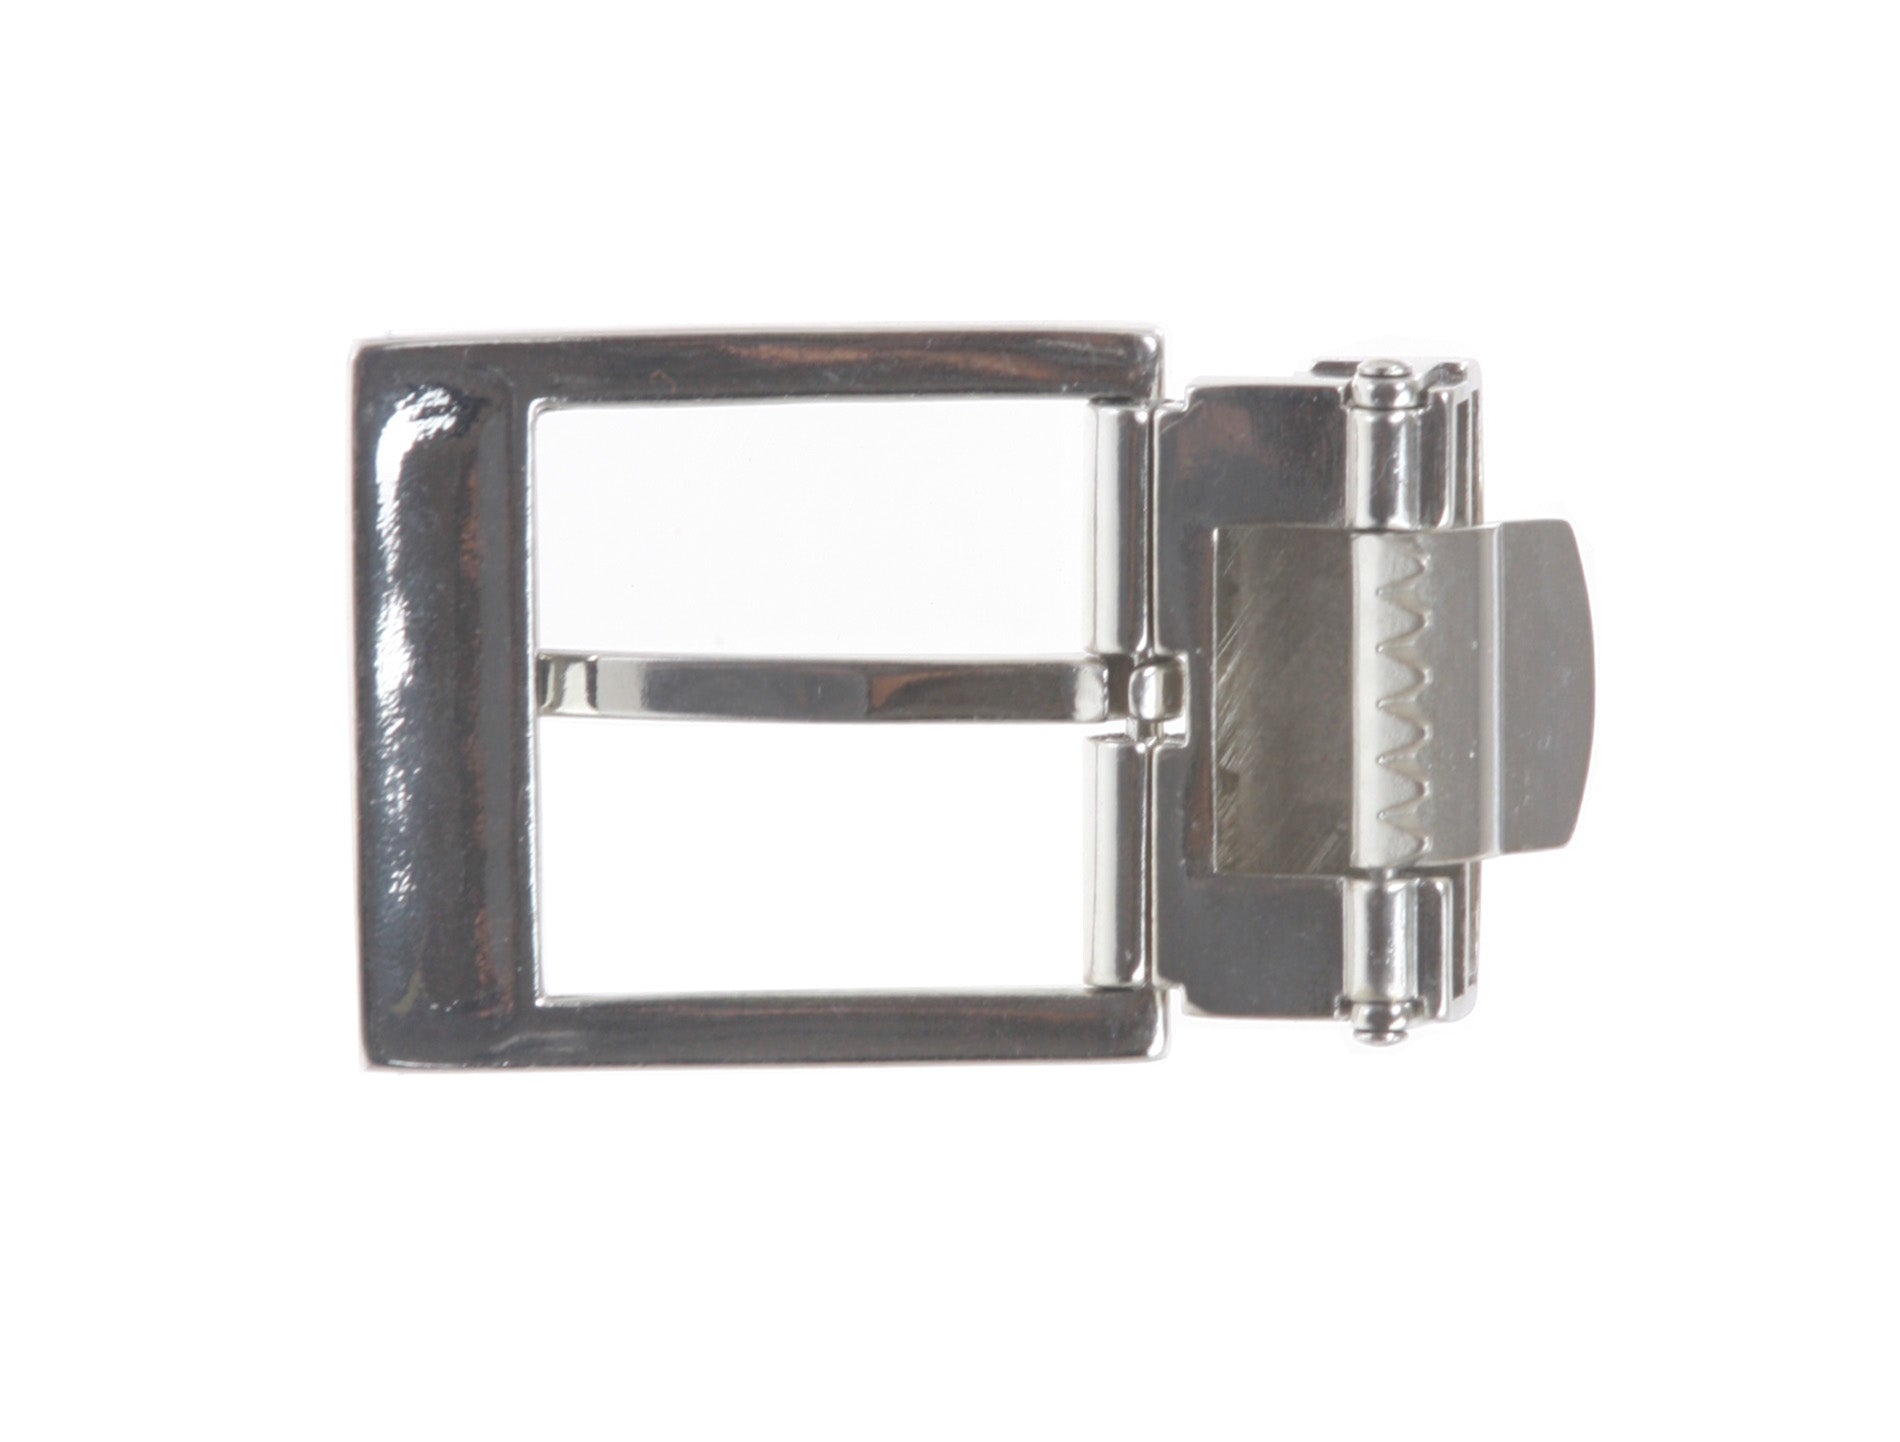 Men's Clamp on Buckle 1 1/4" (34 mm) Reversible Leather Belt